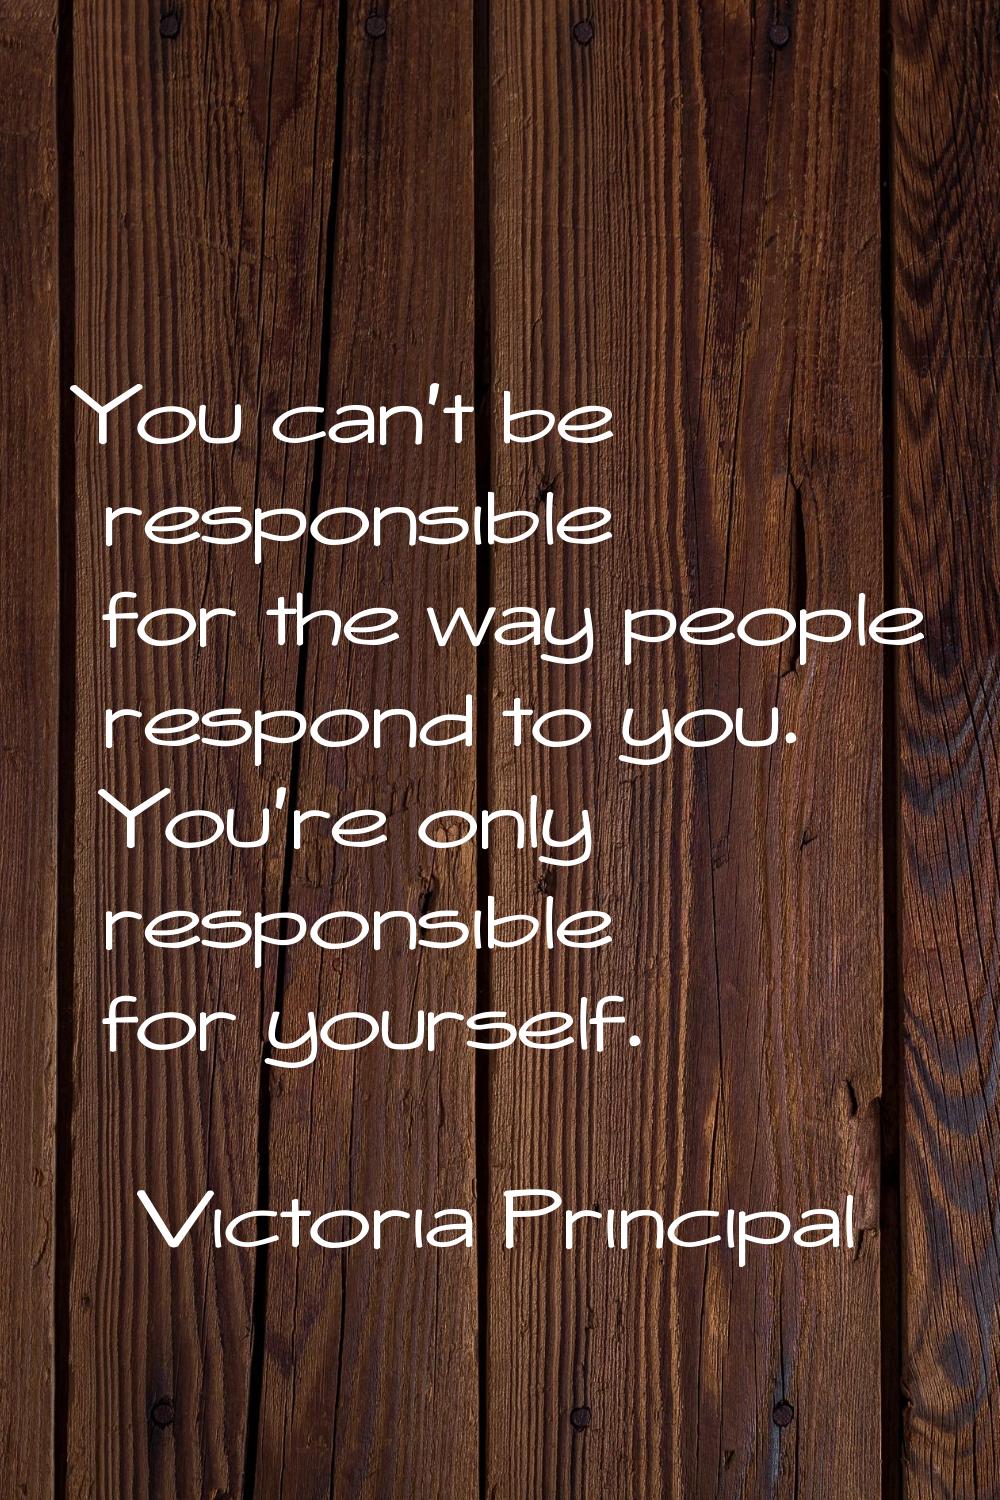 You can't be responsible for the way people respond to you. You're only responsible for yourself.